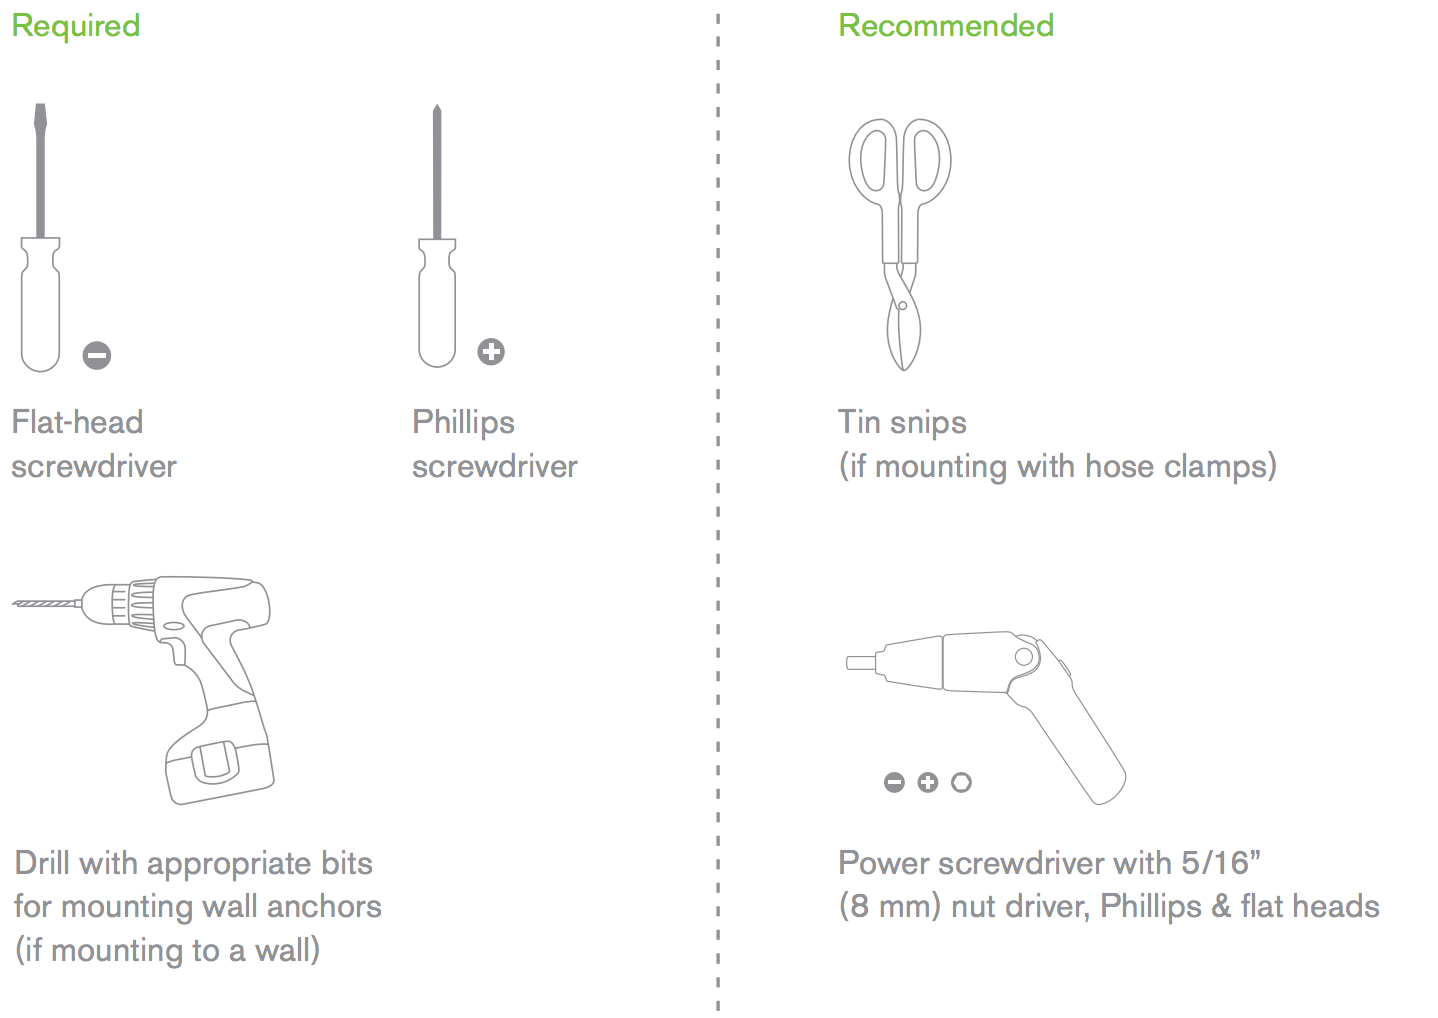 Required tools. Flat head screwdriver, Phillips screwdriver, drill, tin snips, power screwdriver.